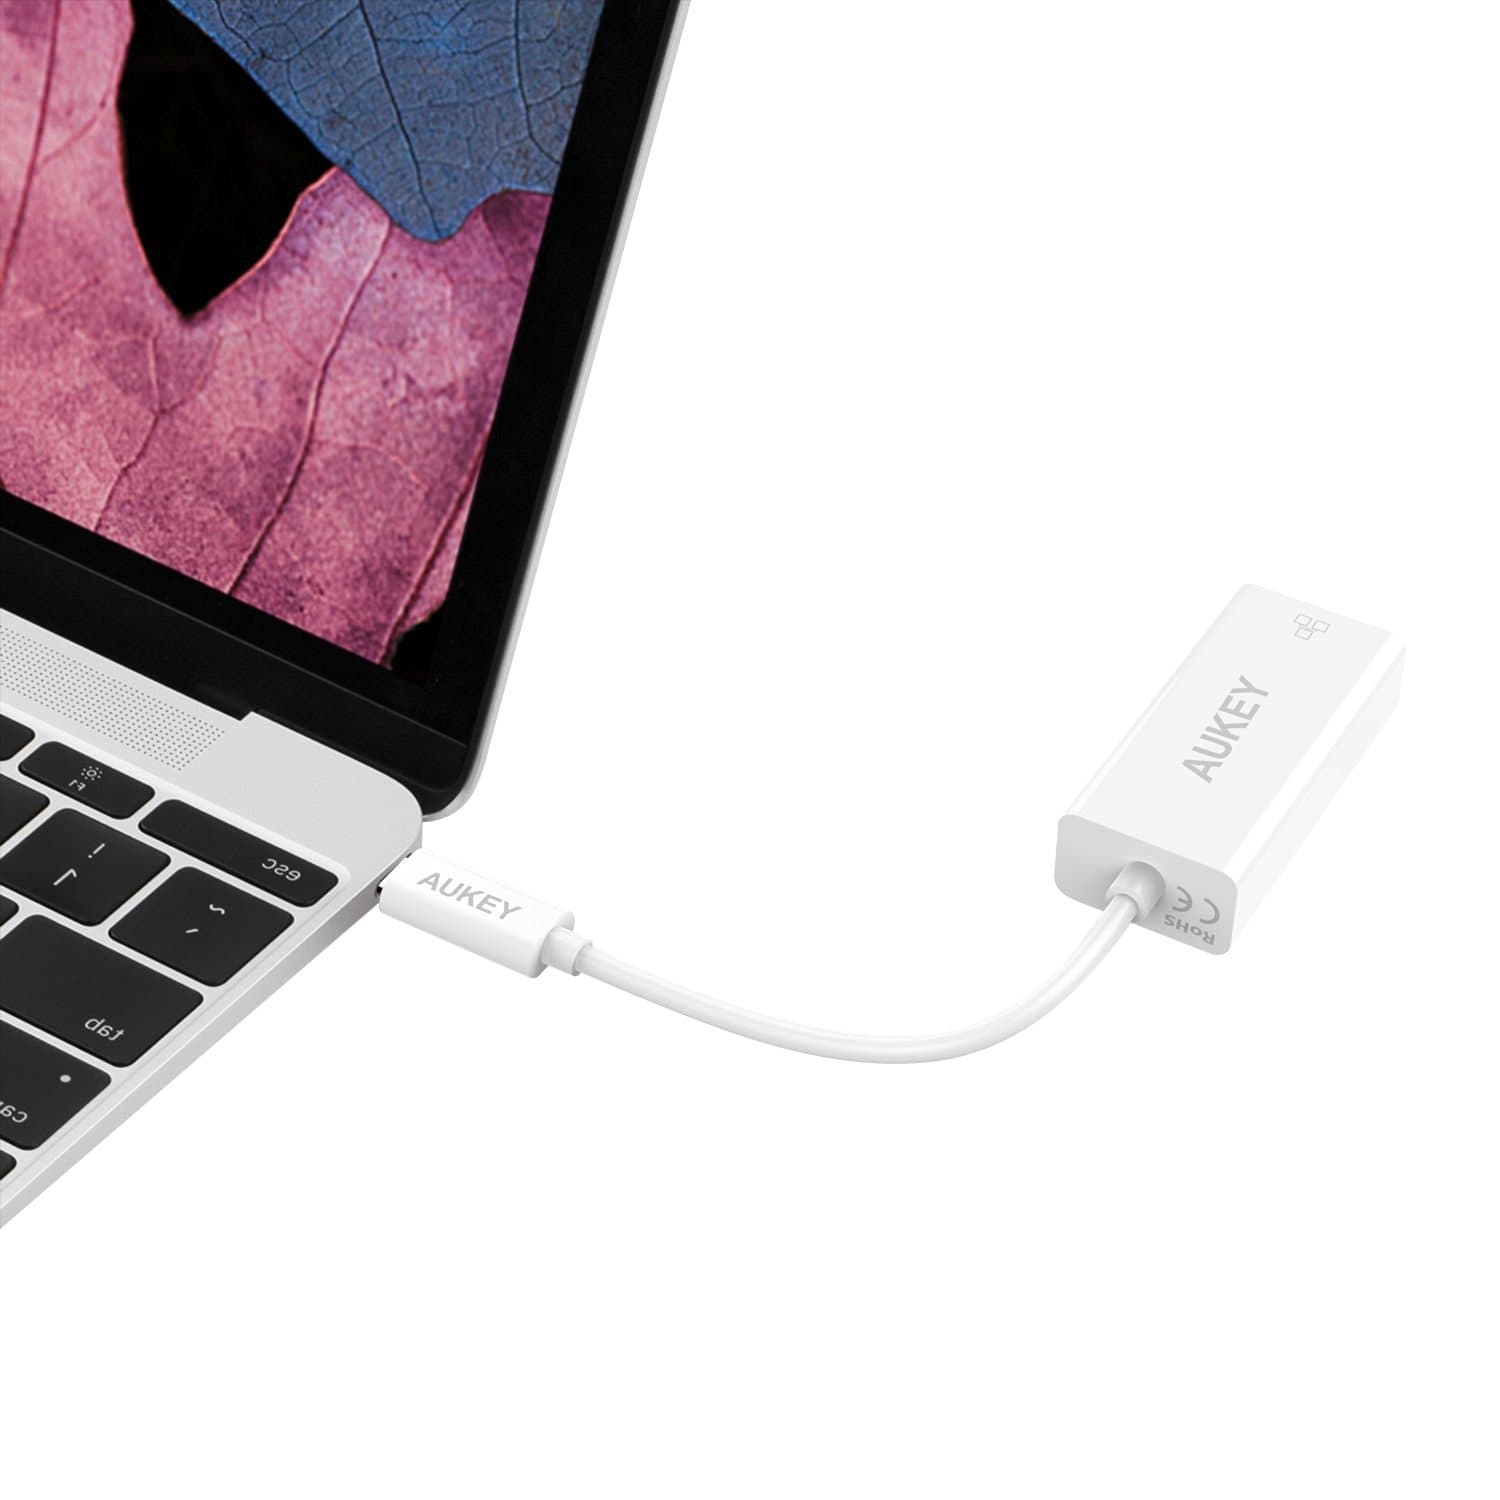 AUKEY CB-C13 USB C to RJ45 Ethernet Adapter - Aukey Malaysia Official Store